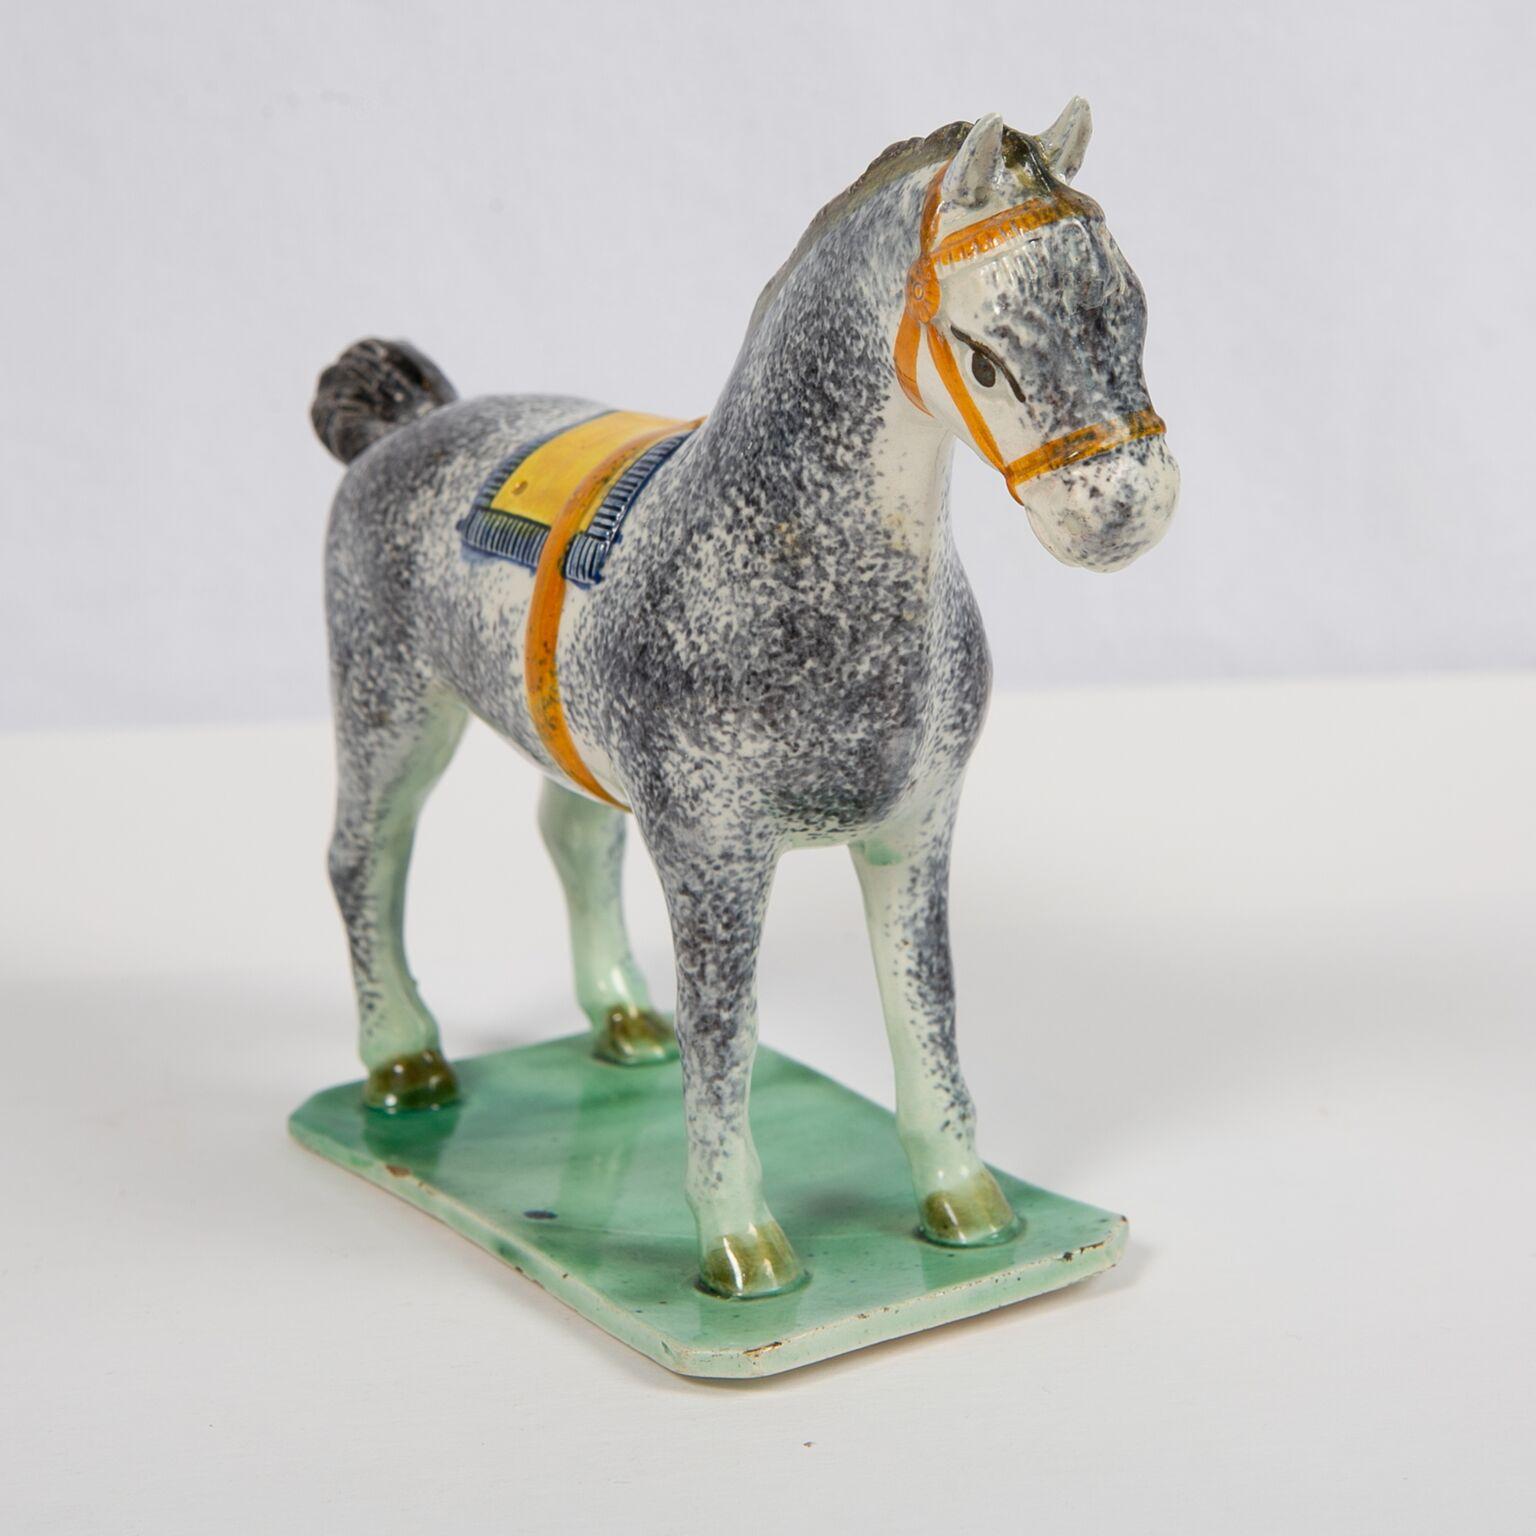 Romantic Antique Pottery Horse Made in England at St. Anthony's Pottery, circa 1800-1810